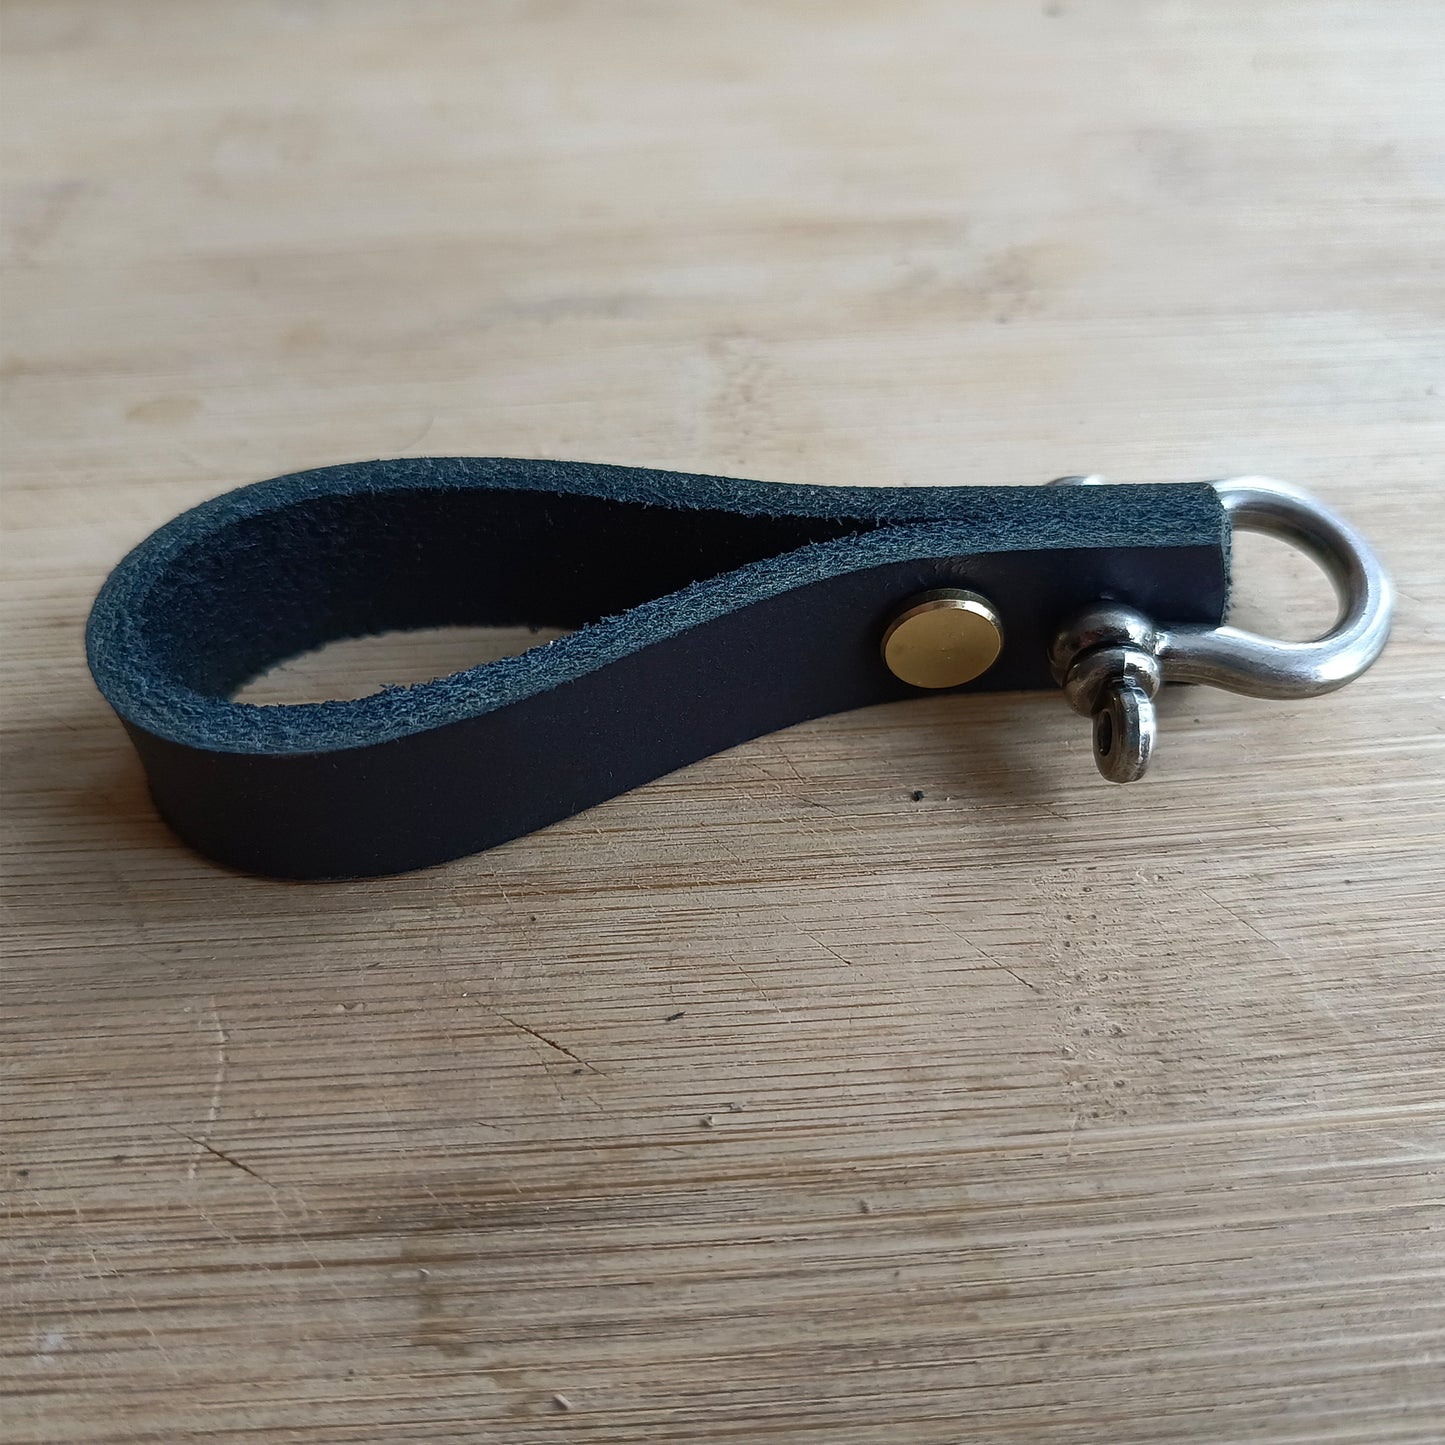 Meeboy Handmade Thick Leather Keychain, Leather Car Keyring,leather Key Holder,leather belt keeper (alloy buckle)